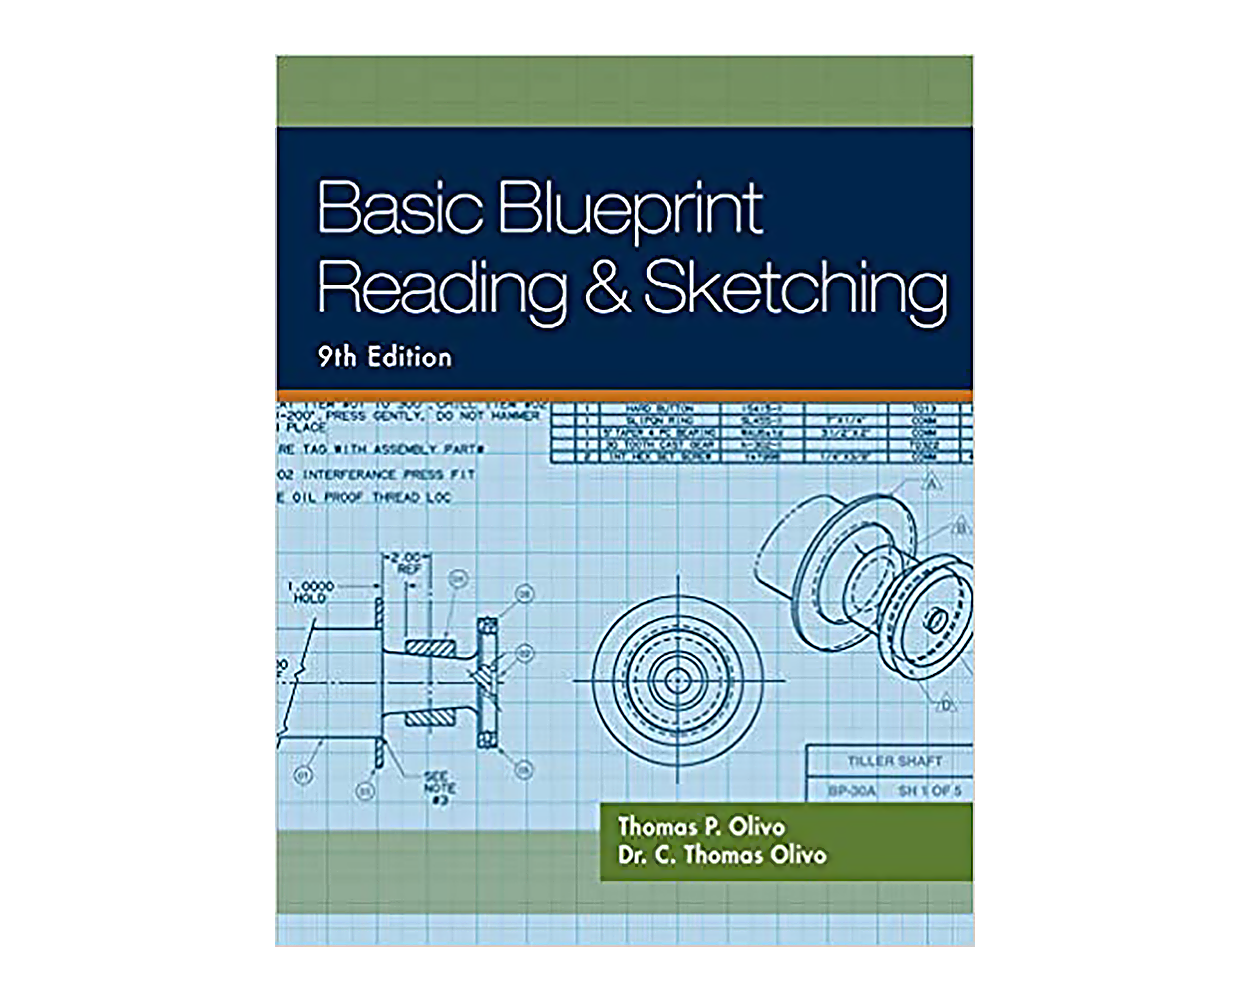 assignment unit 1 bases for blueprint reading and sketching